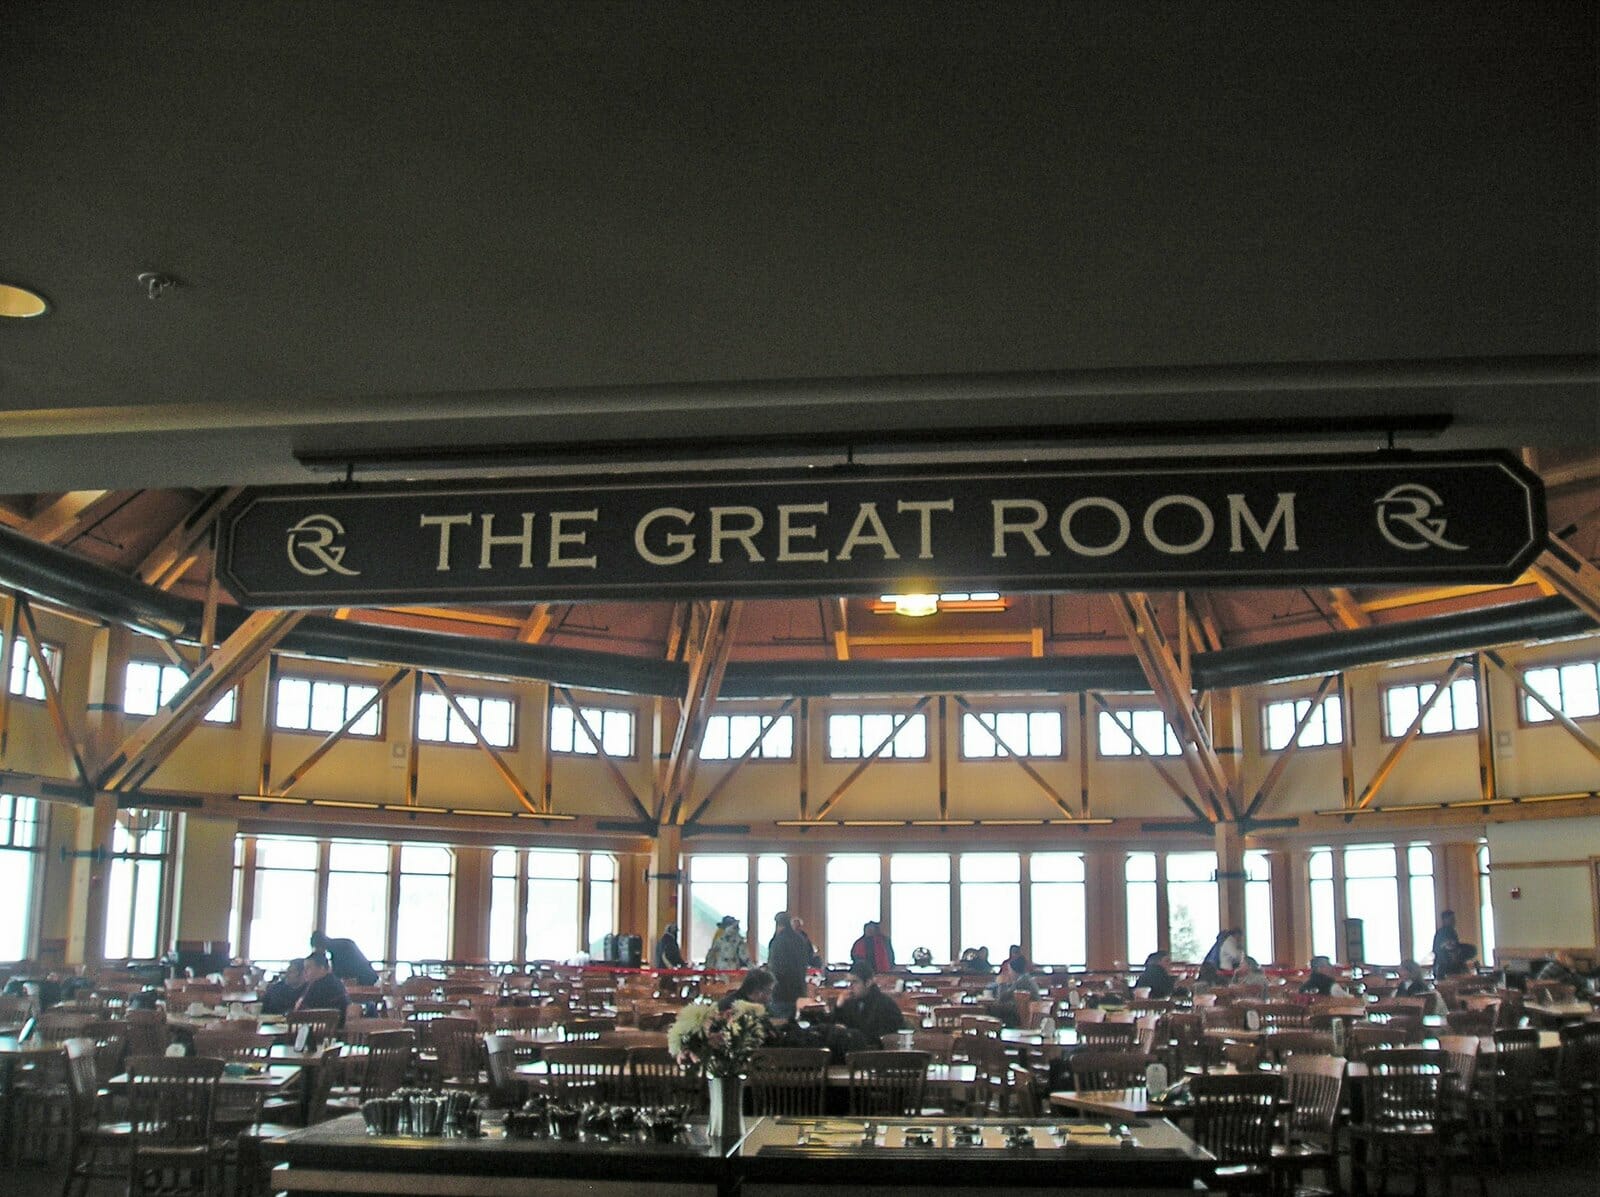 The Great Room